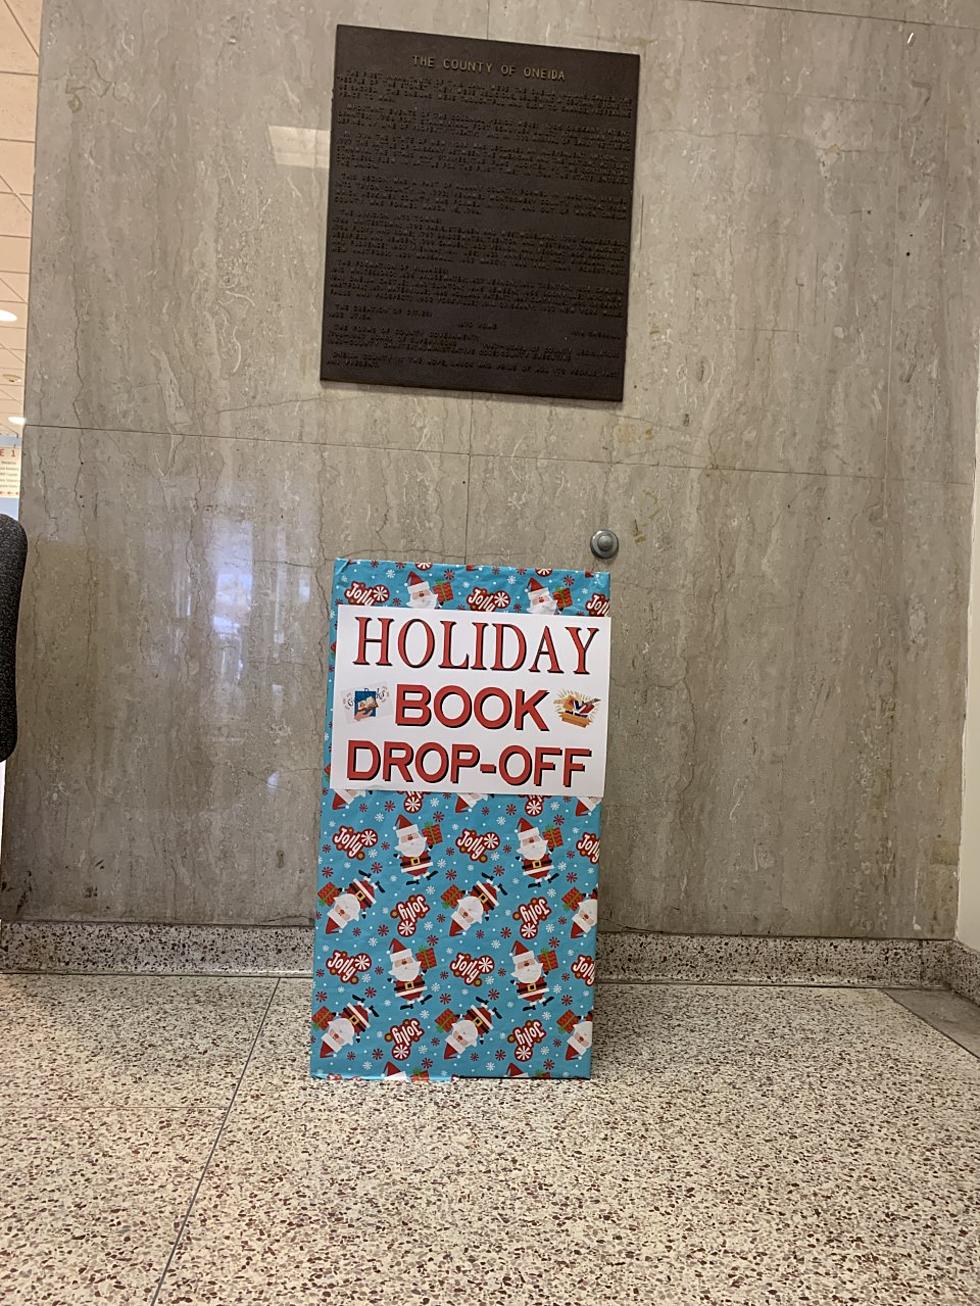 Give The Gift Of Reading, Oneida County Holding Holiday Book Drive